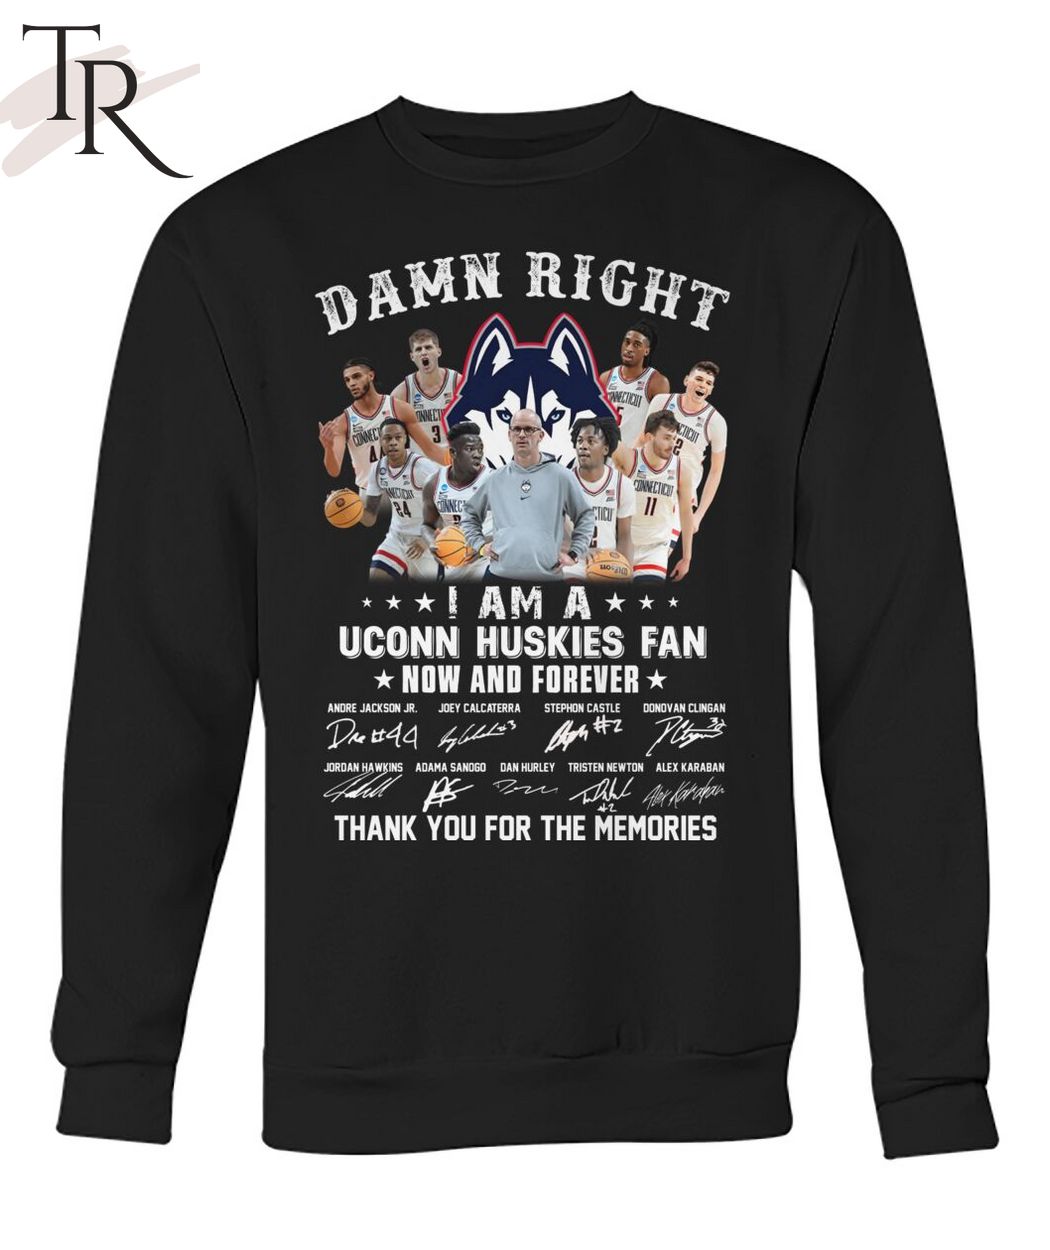 Damn Right I Am A Uconn Huskies Fan Now And Forever Thank You For The Memories T-Shirt